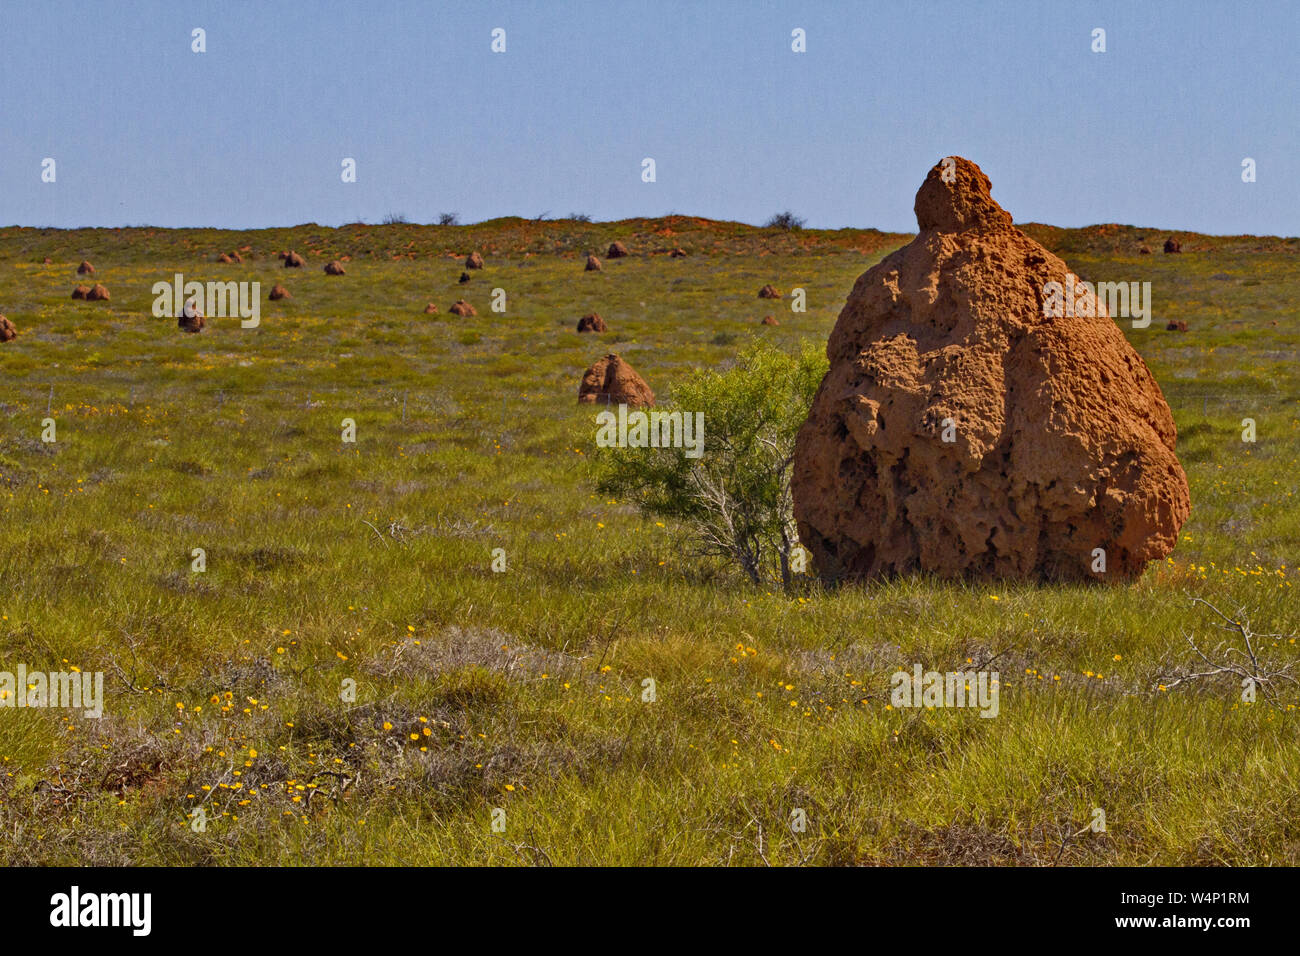 Big termite mounds are notable accents to landscape in Western Australia Stock Photo